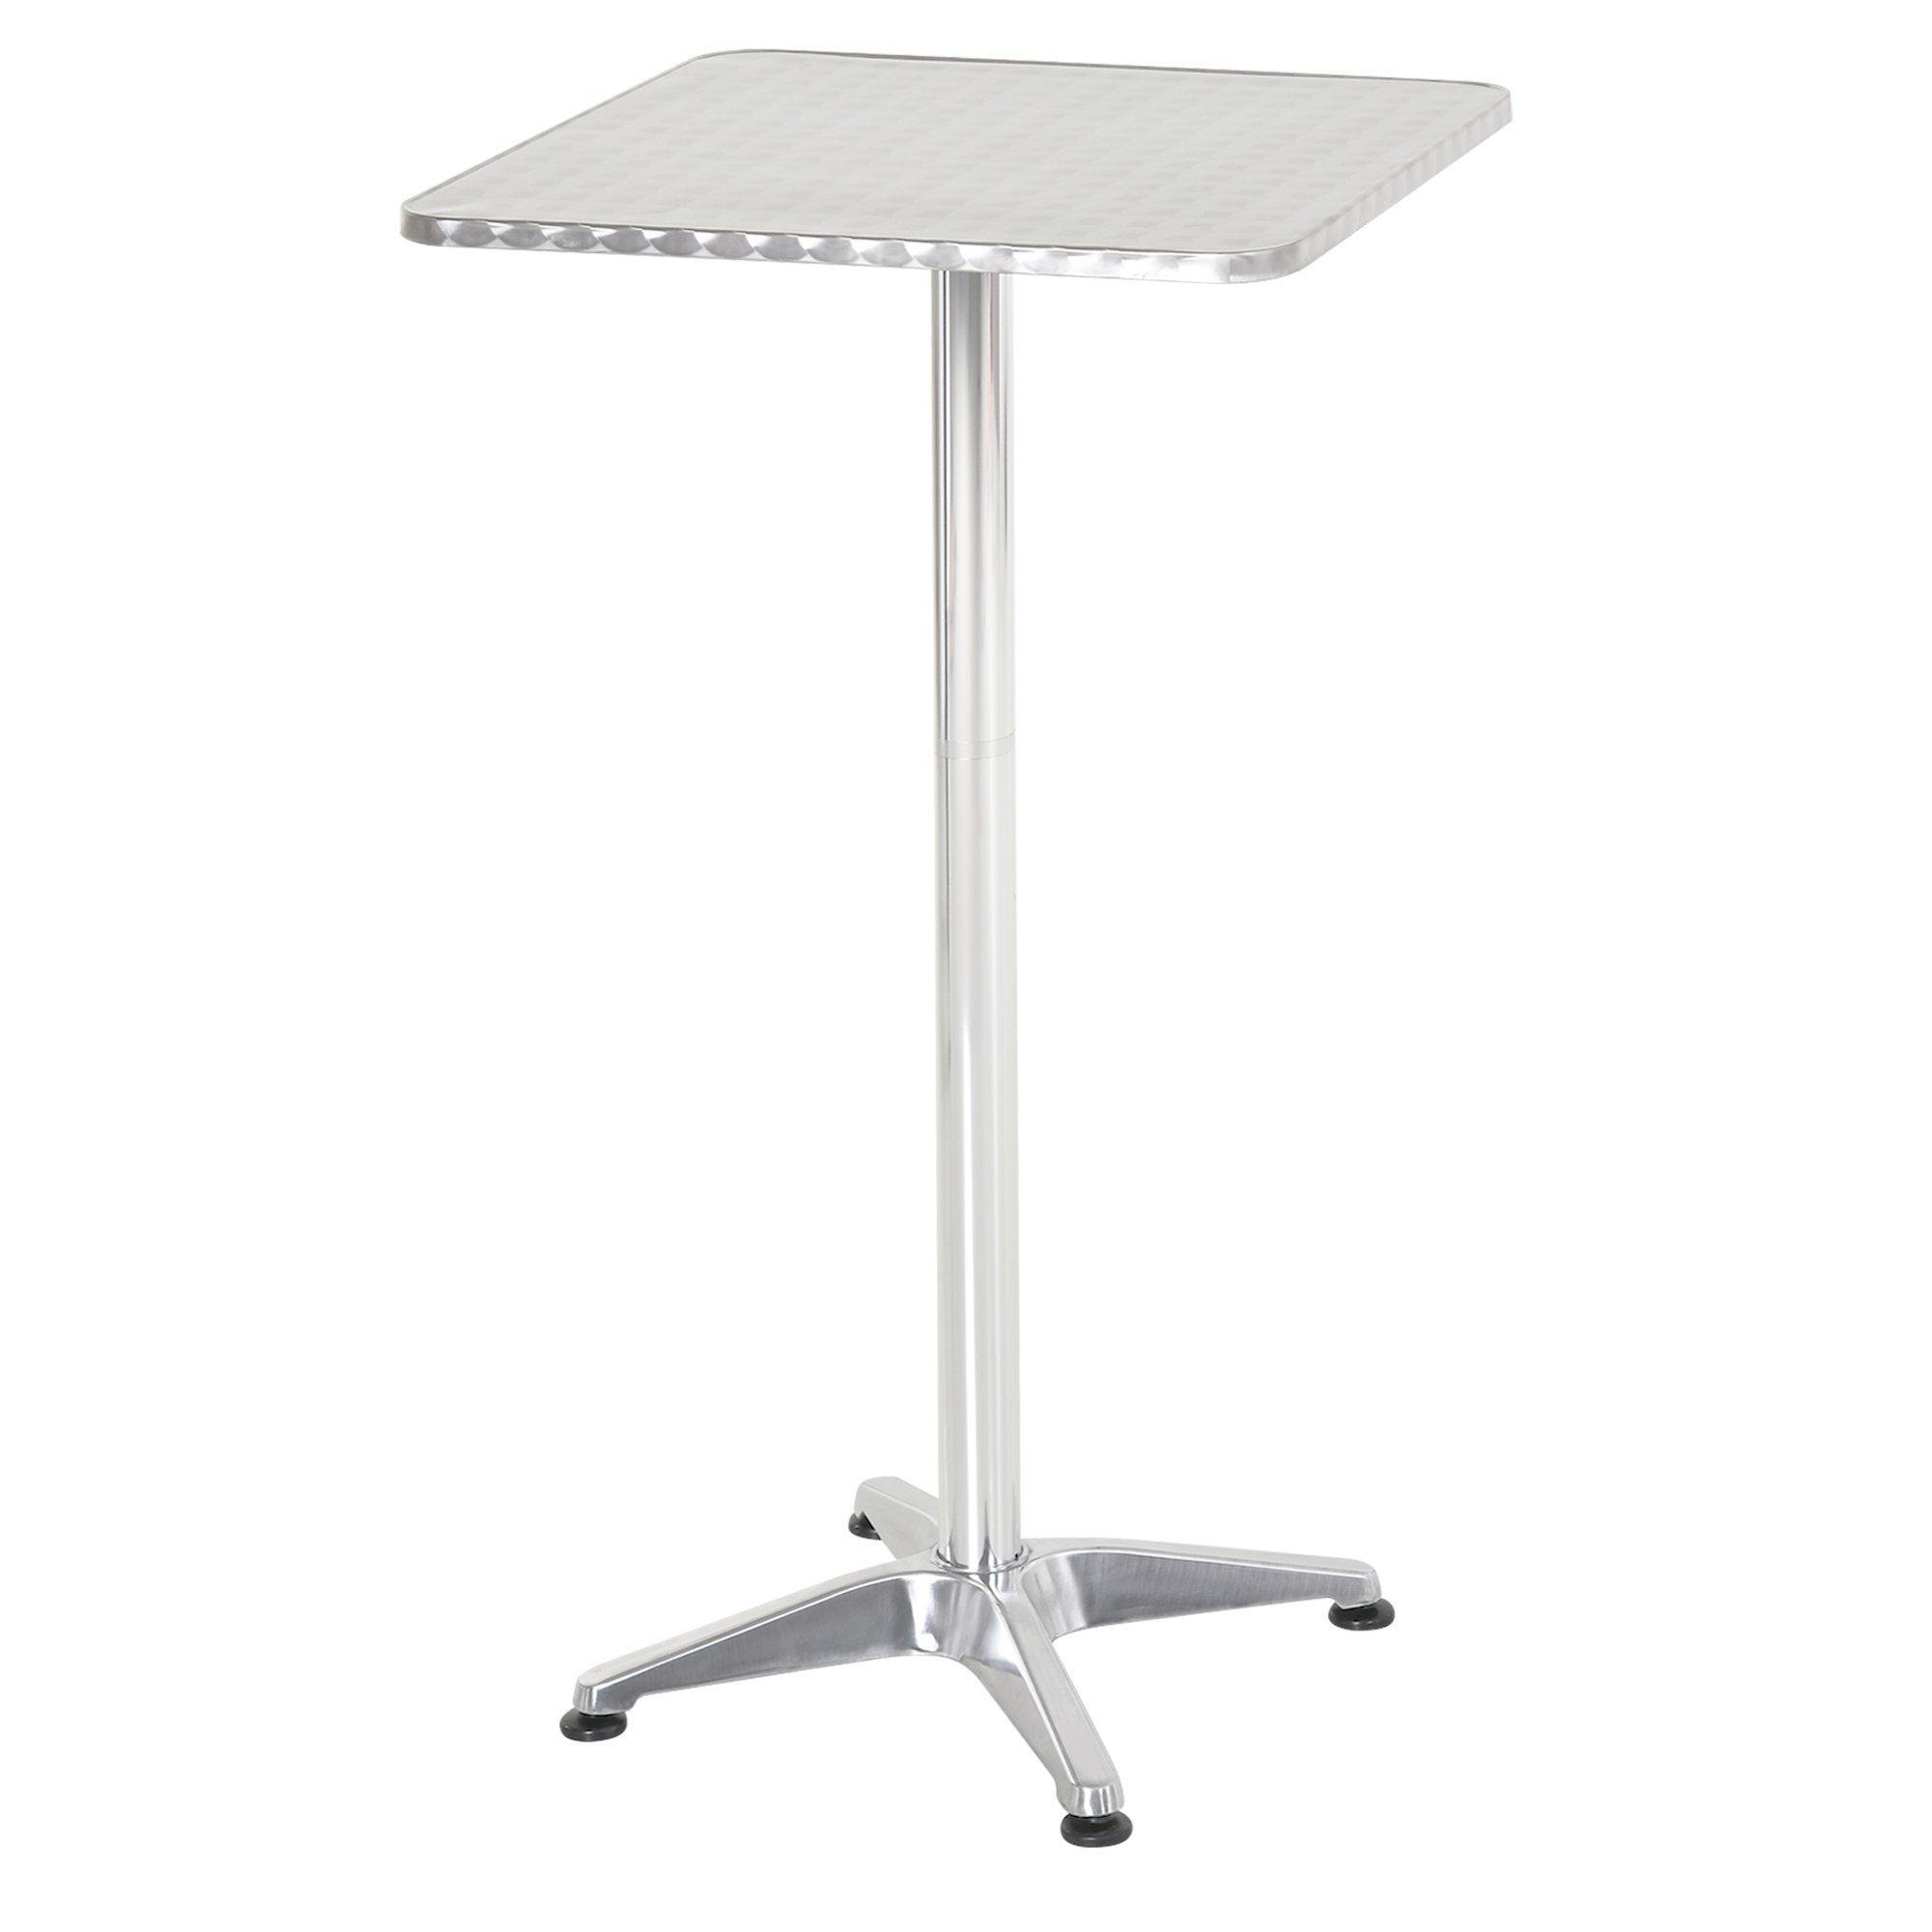 Bistro Bar Coffee Square Table Height Adjustable with Aluminum Edges - image 1